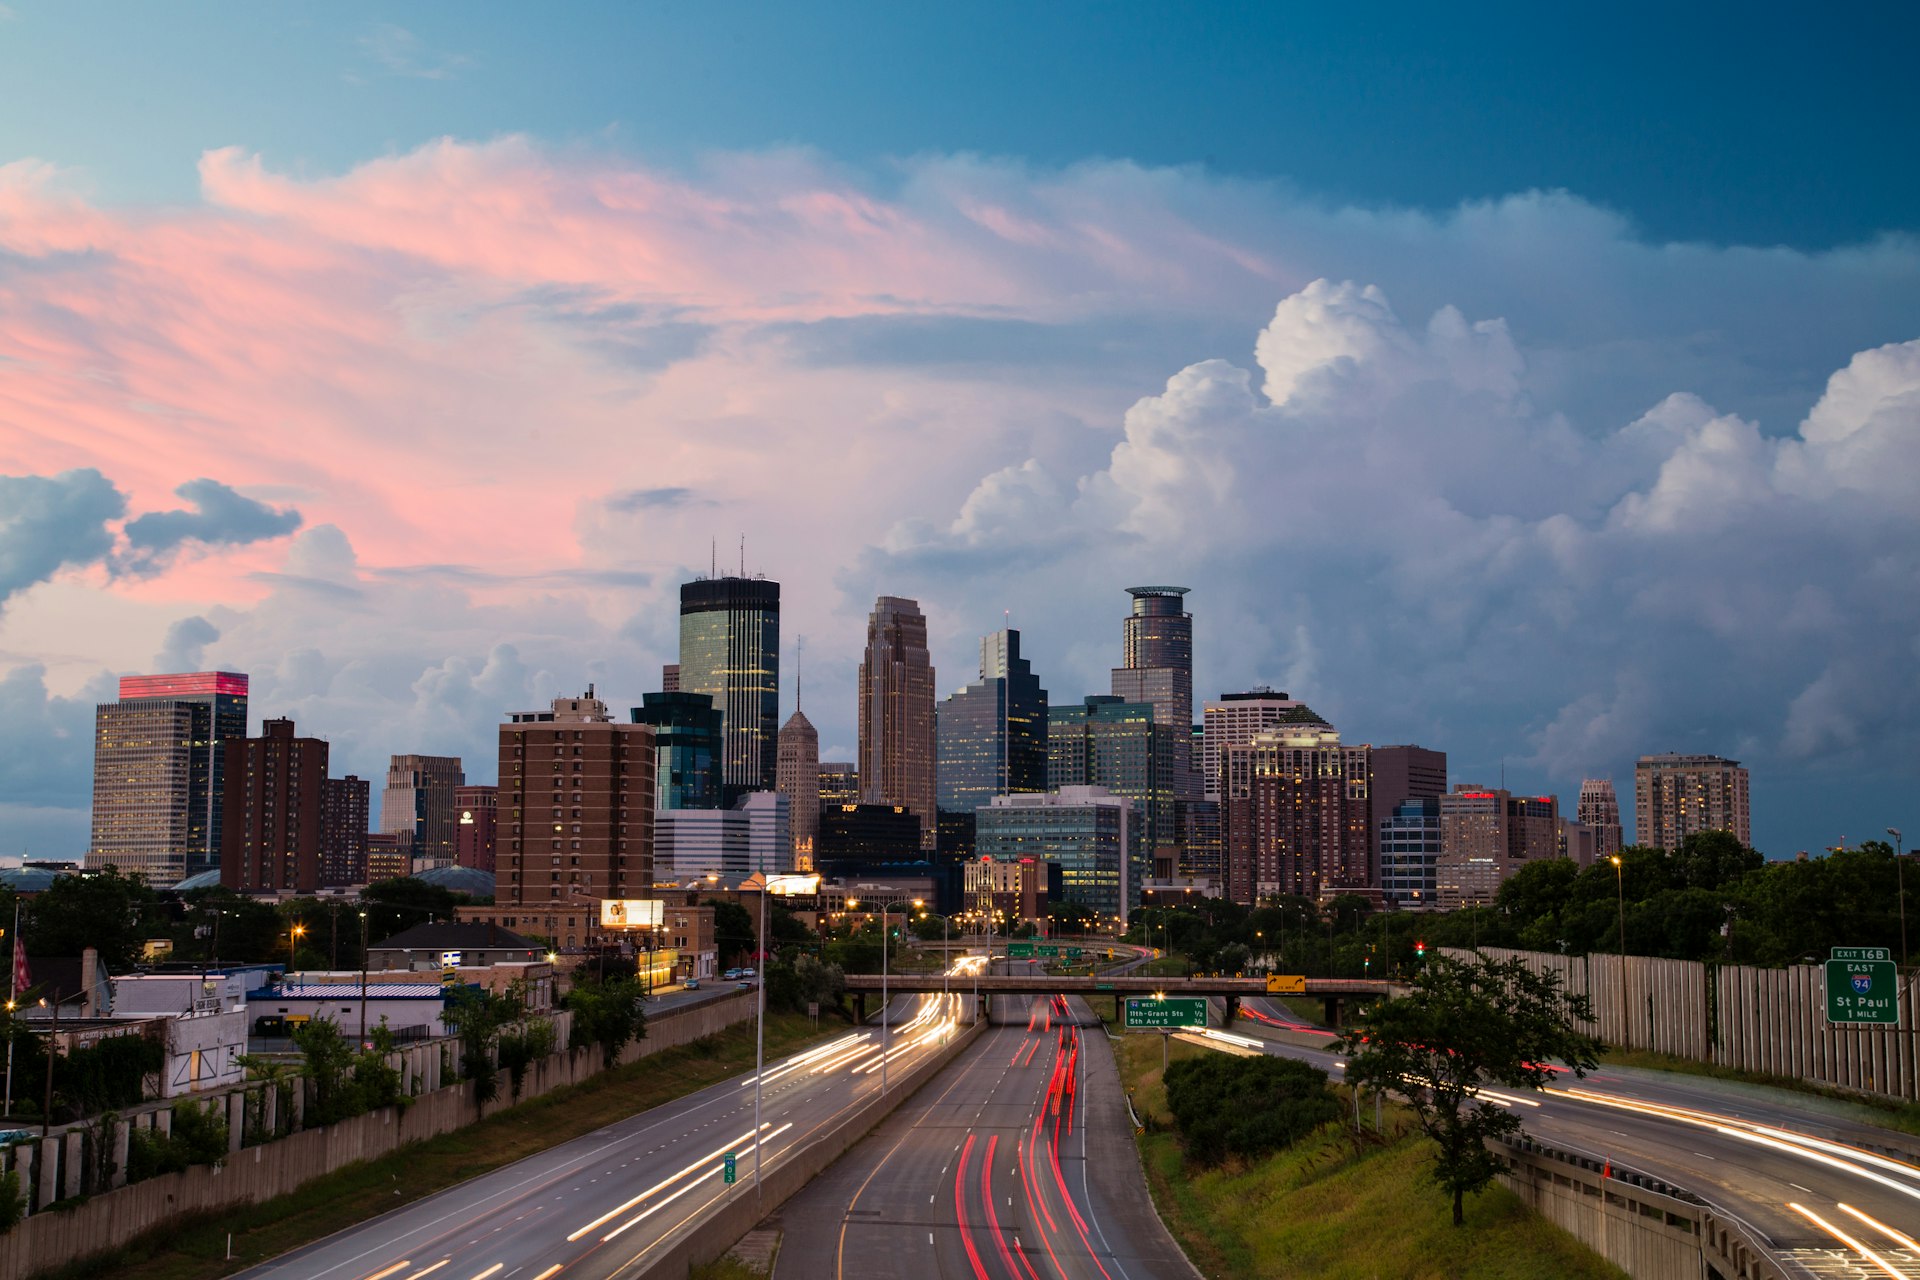 The iconic skyline shot from the 24th Avenue pedestrian bridge over I-35W just after a storm passed through